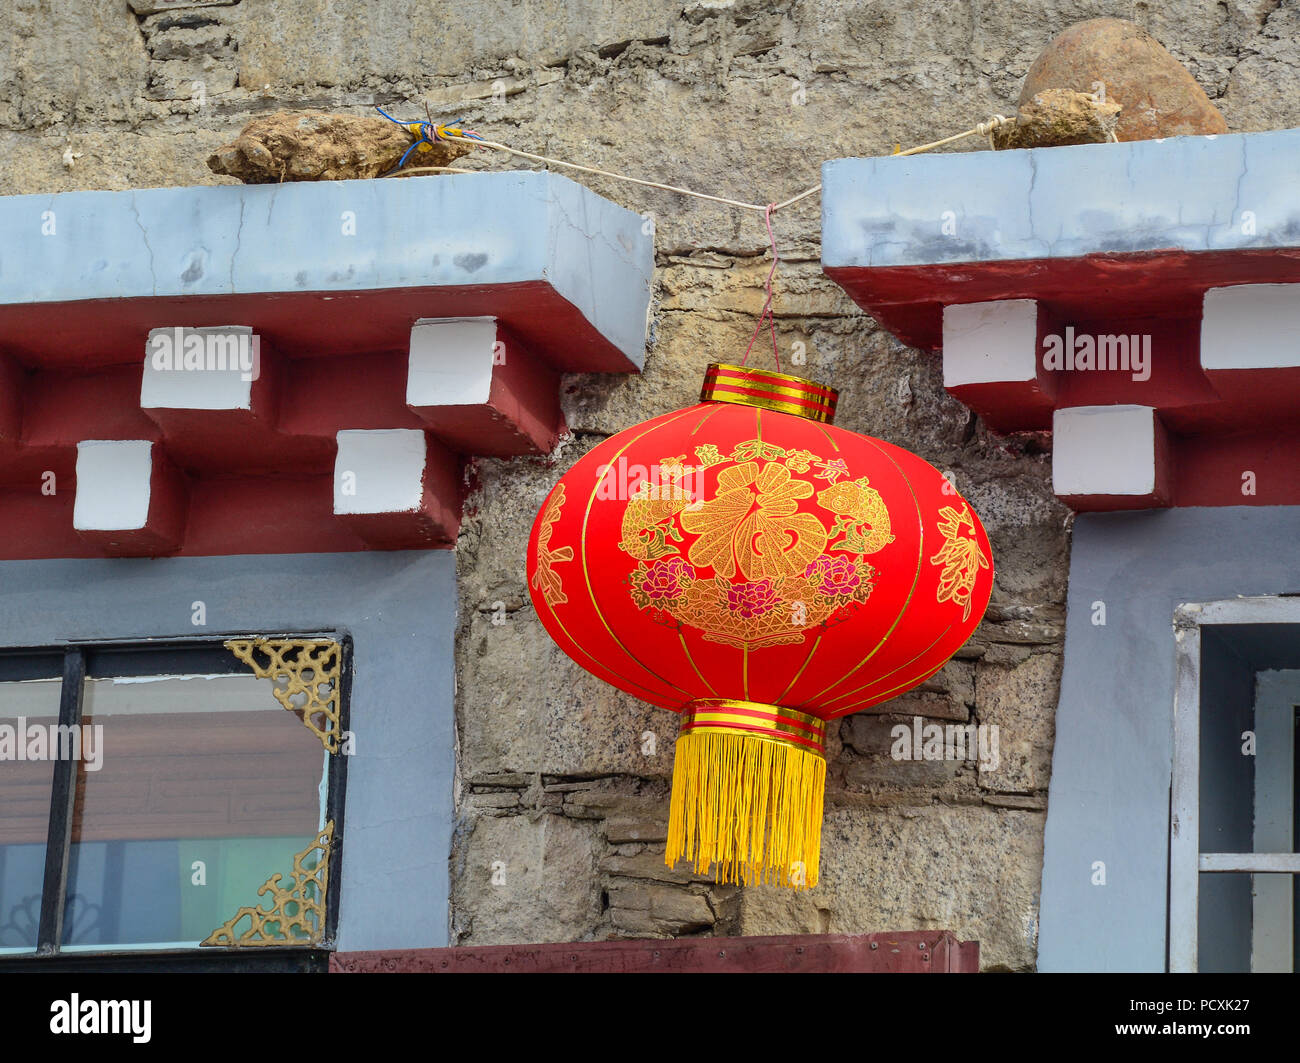 Daocheng, China - Aug 15, 2016. A red lantern for decoration at traditional house in Daocheng, China. Stock Photo